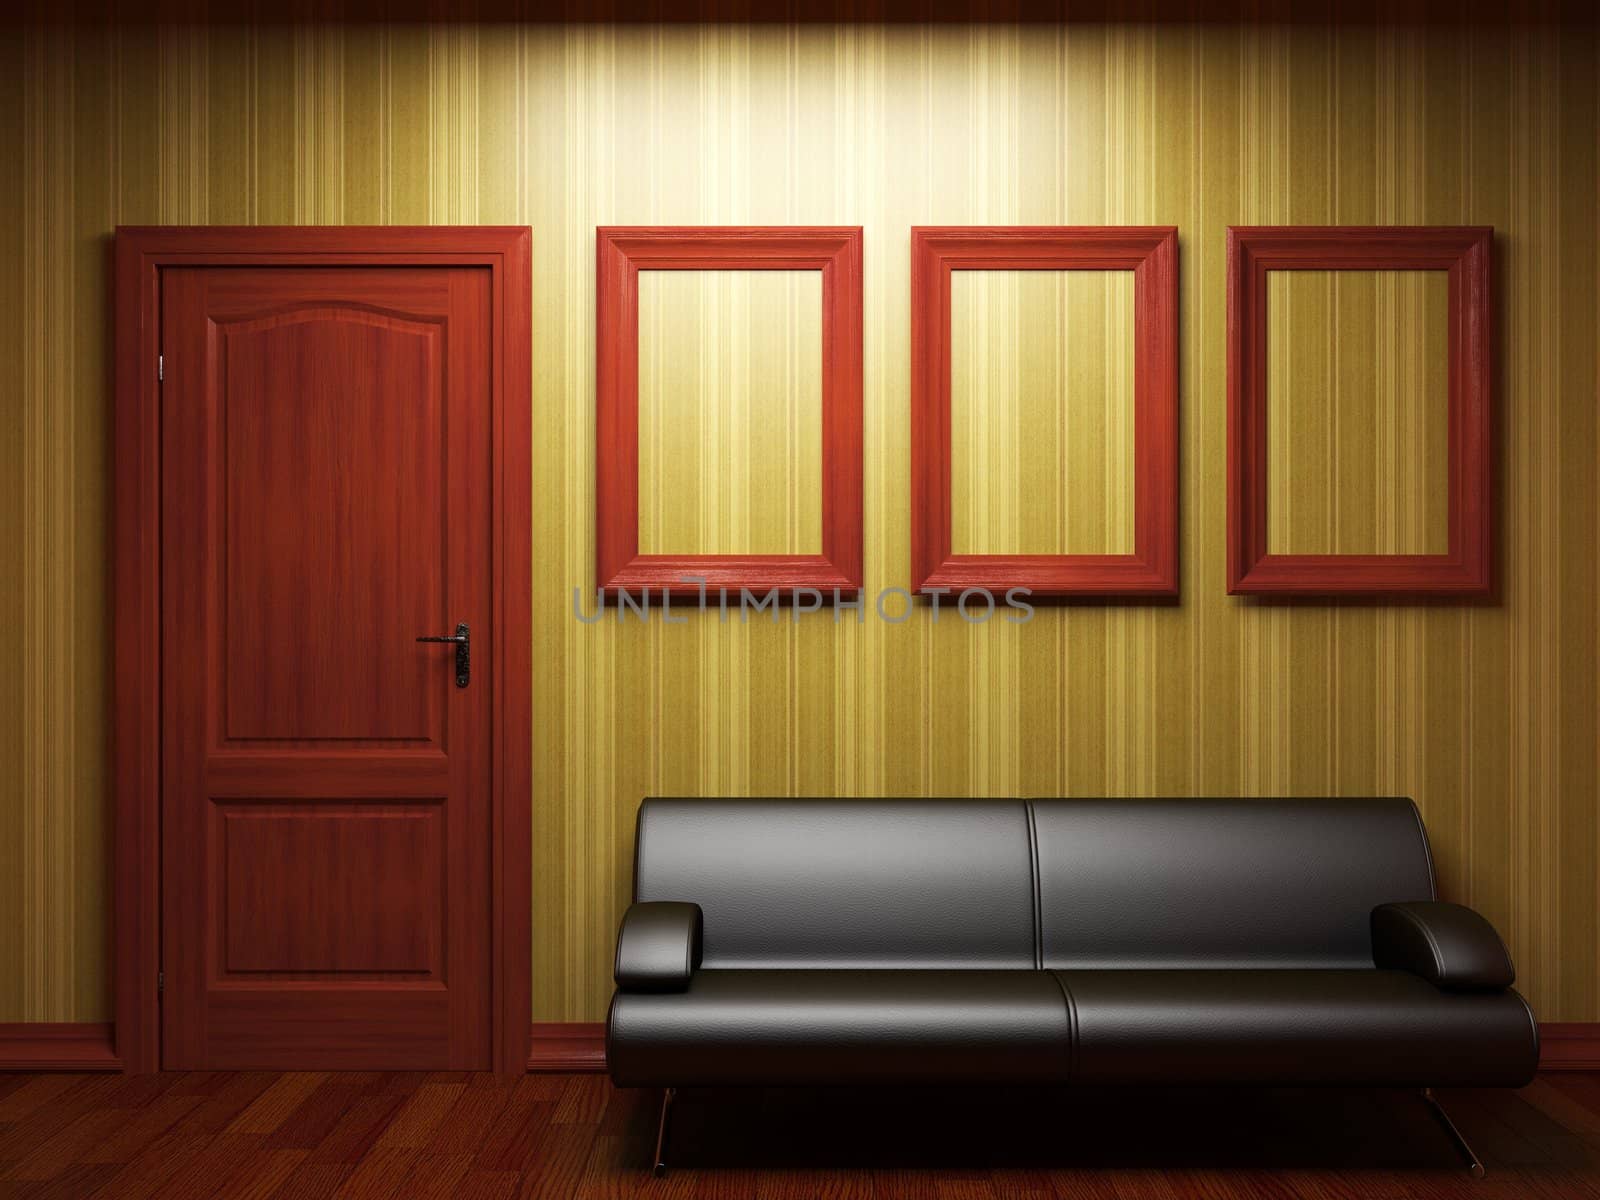 illuminated fabric wallpaper and door made in 3D